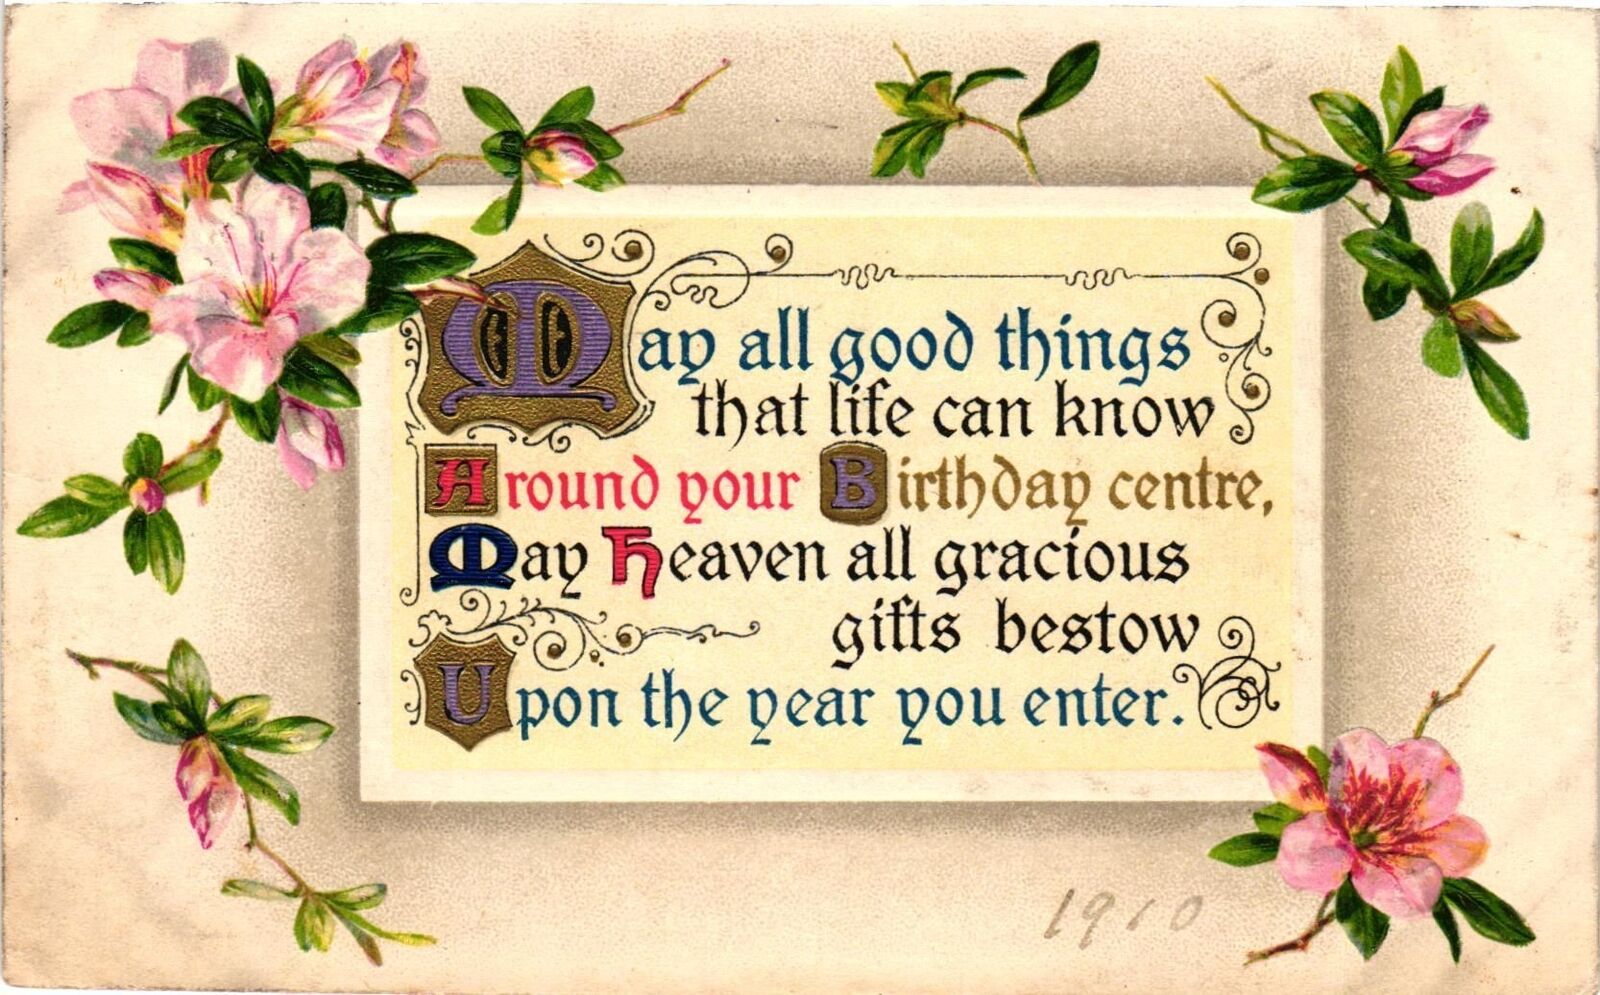 Vintage Postcard- May all good things that life can know